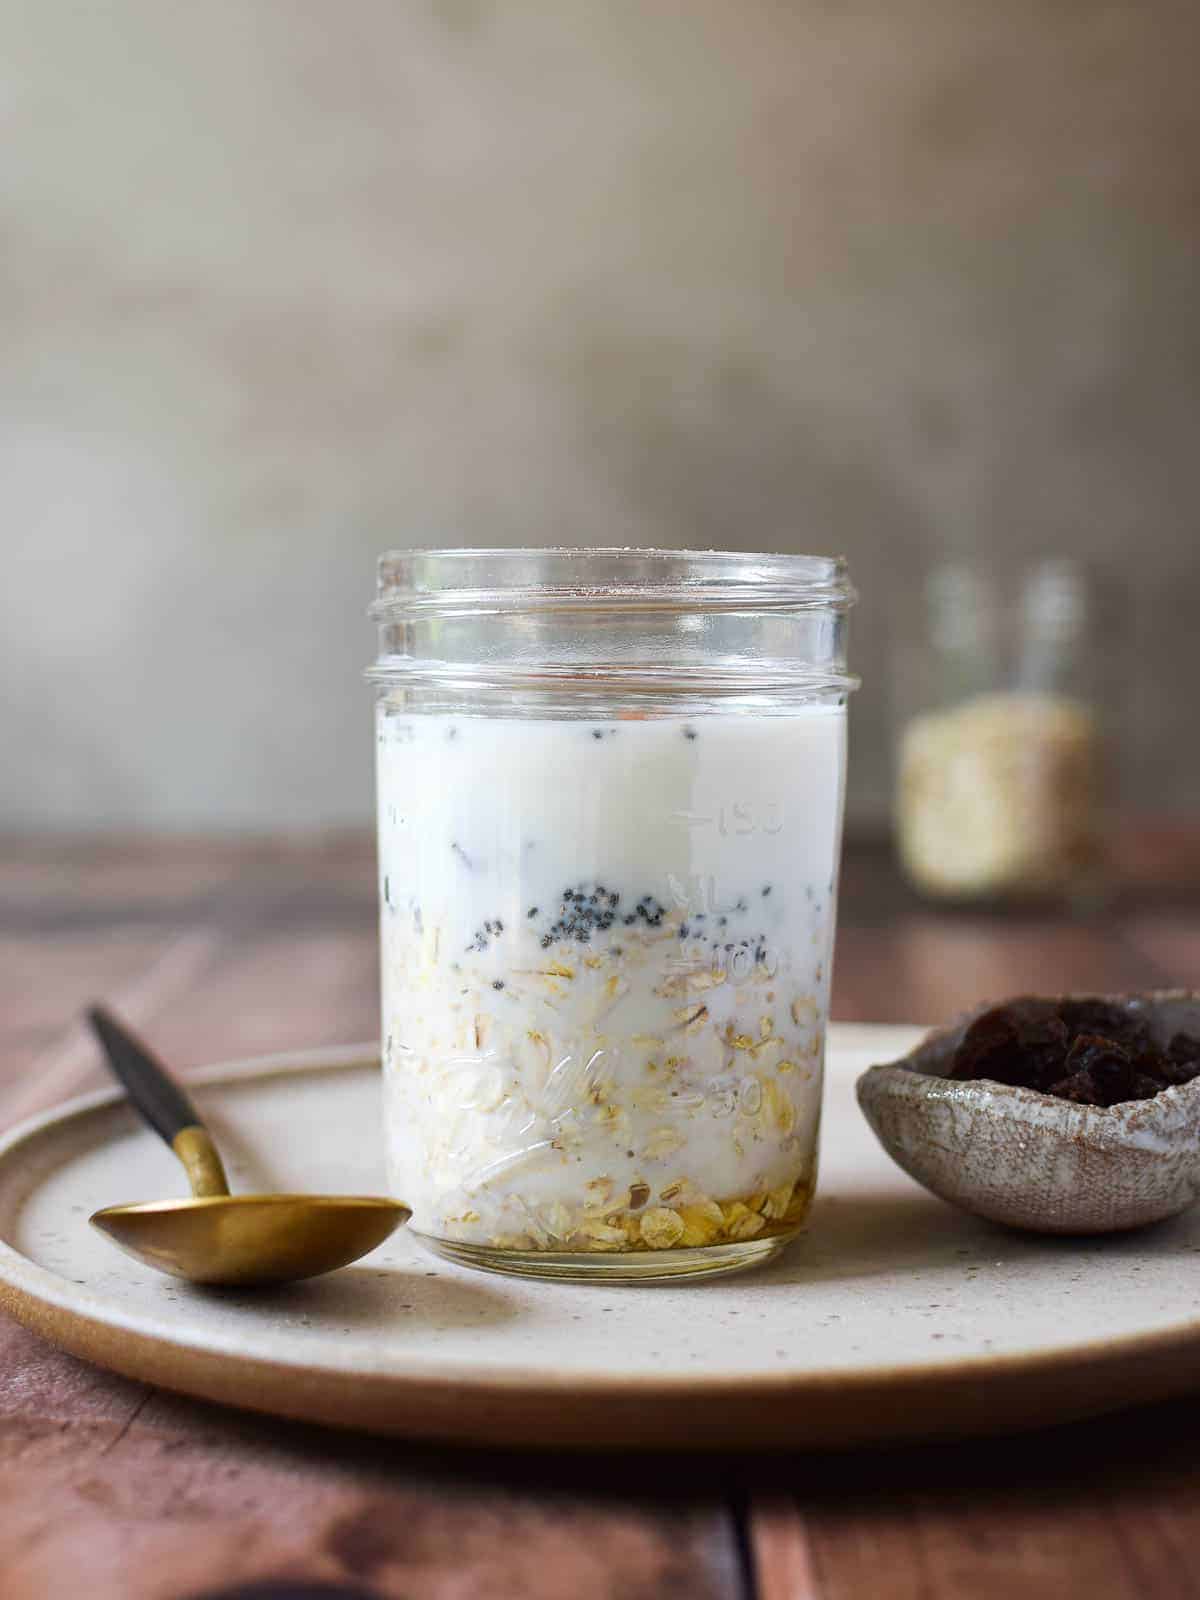 Overnight oats are prepared before going into the refrigerator.